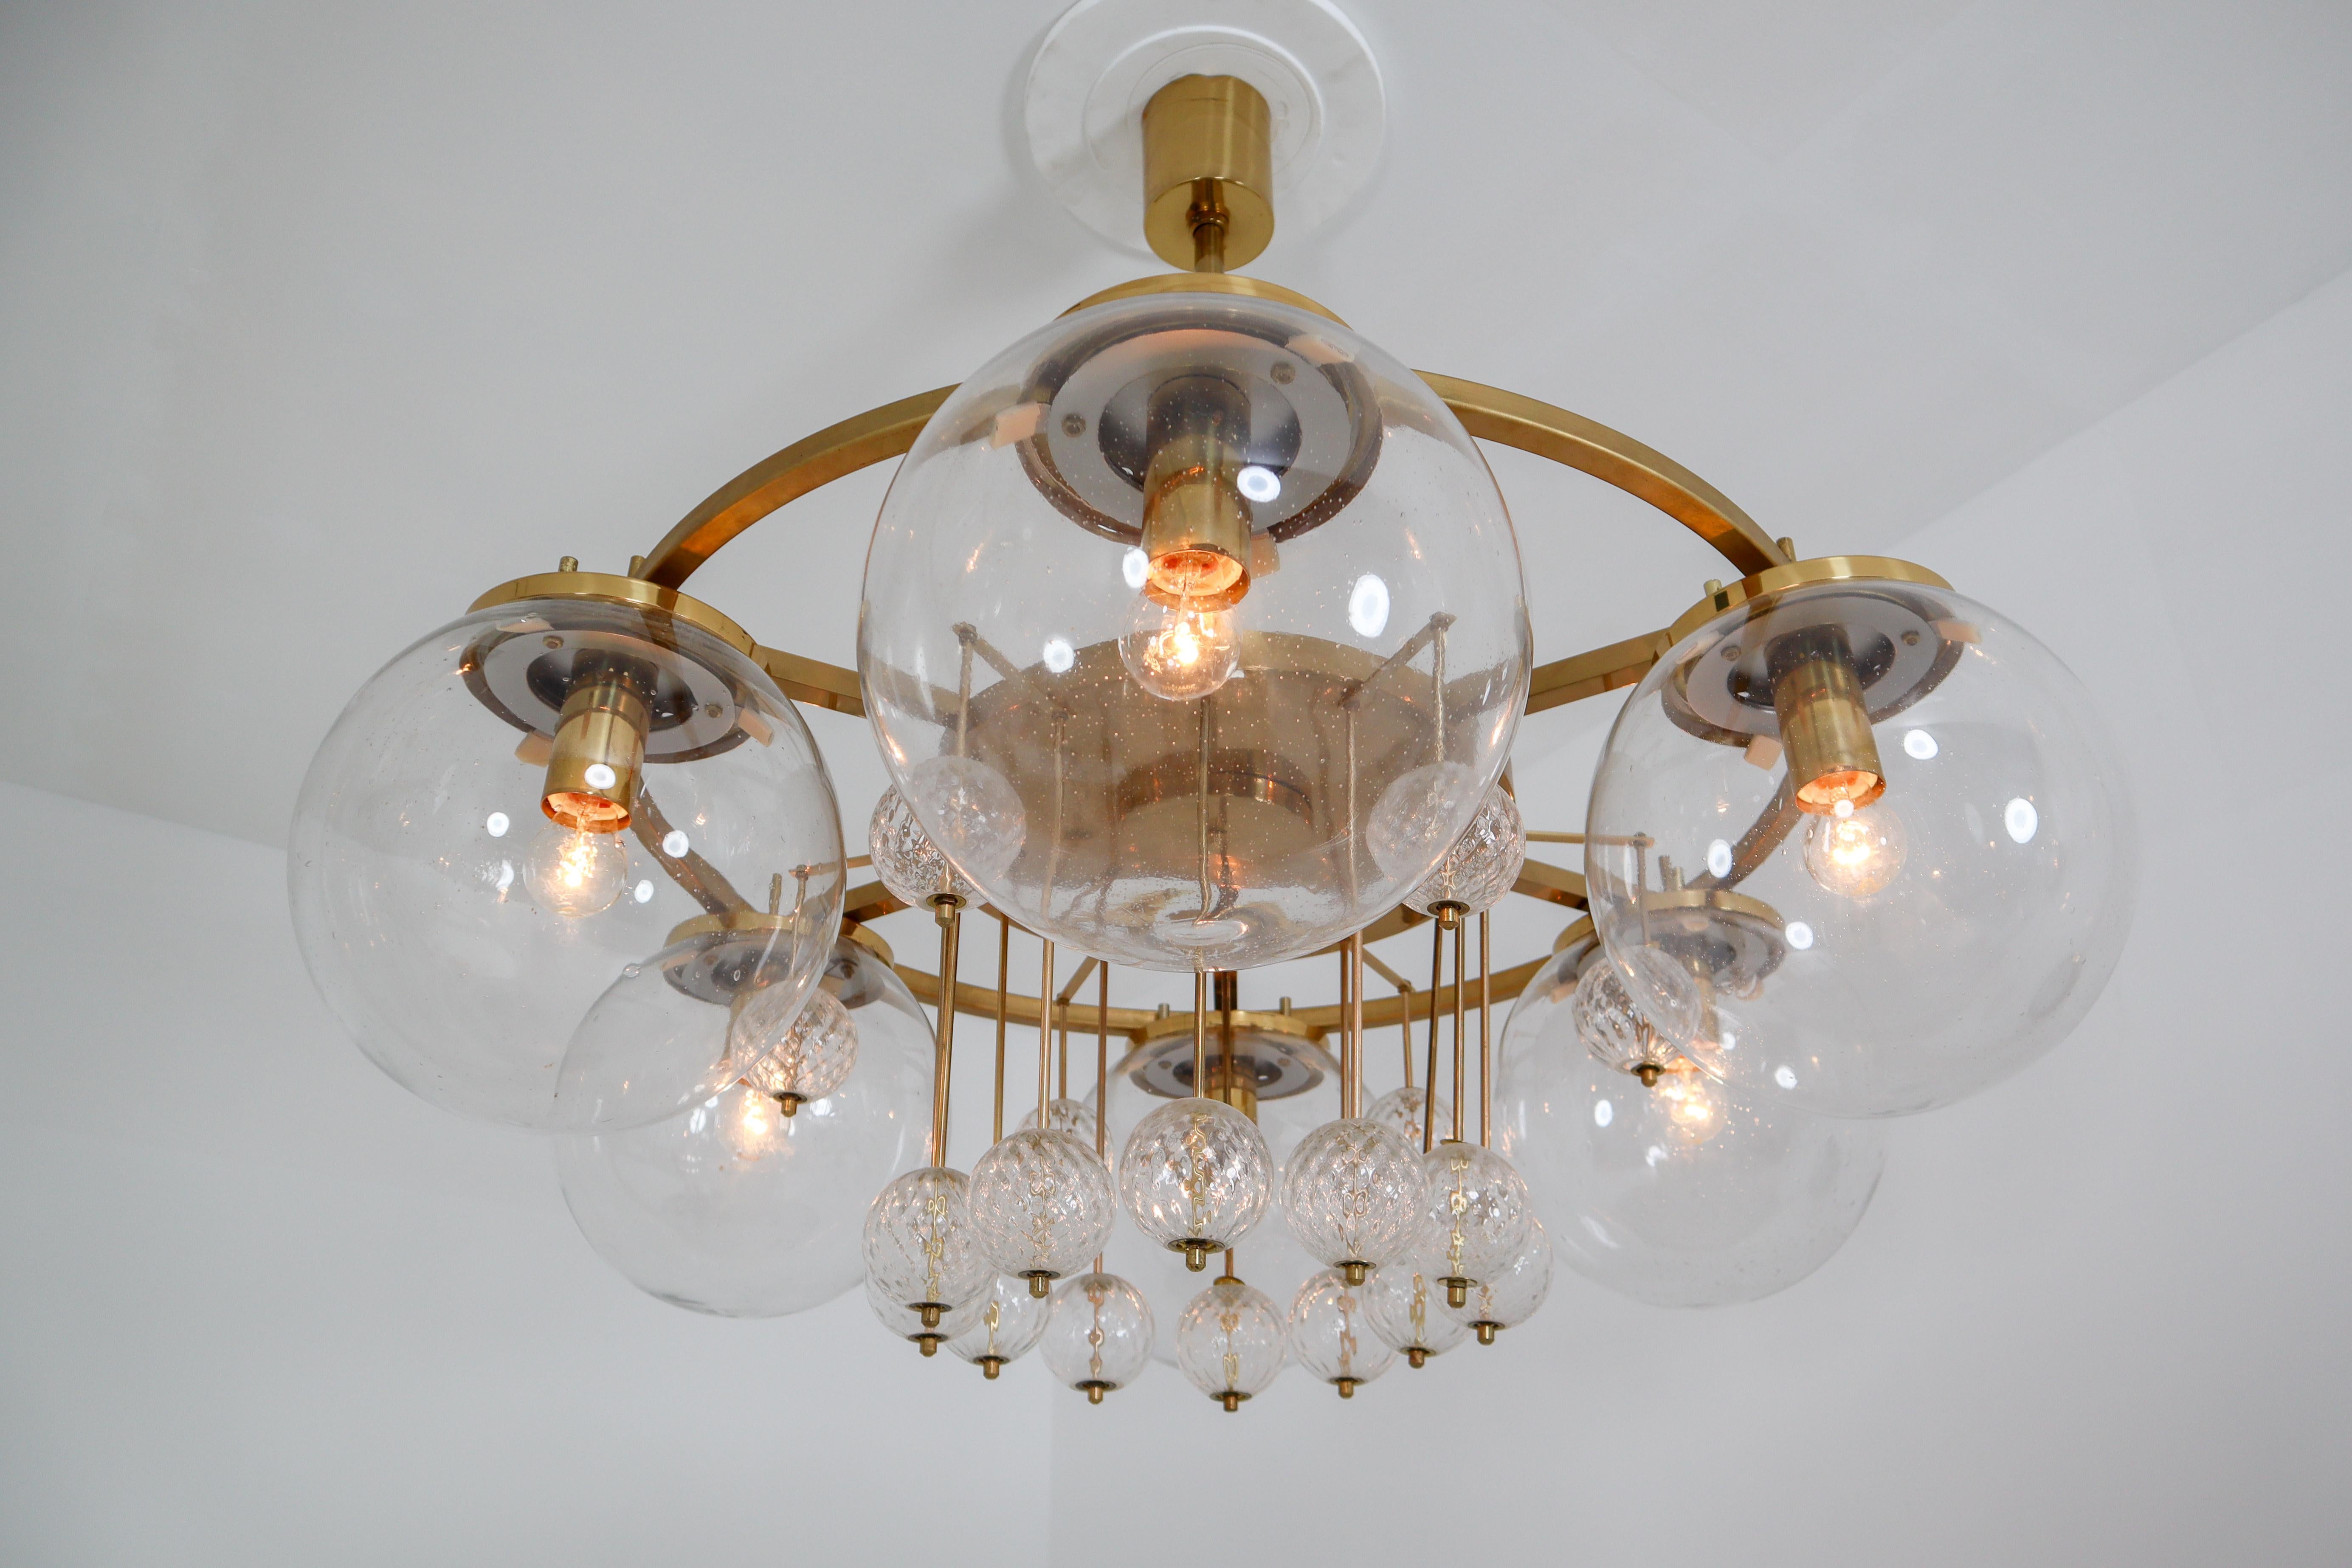 Large hotel chandelier with brass fixture and large hand blowed glass. The chandelier with brass frame consist of six lights, formed in a circle, with glass shades. The pleasant light it spreads is very atmospheric. Completed with the structured